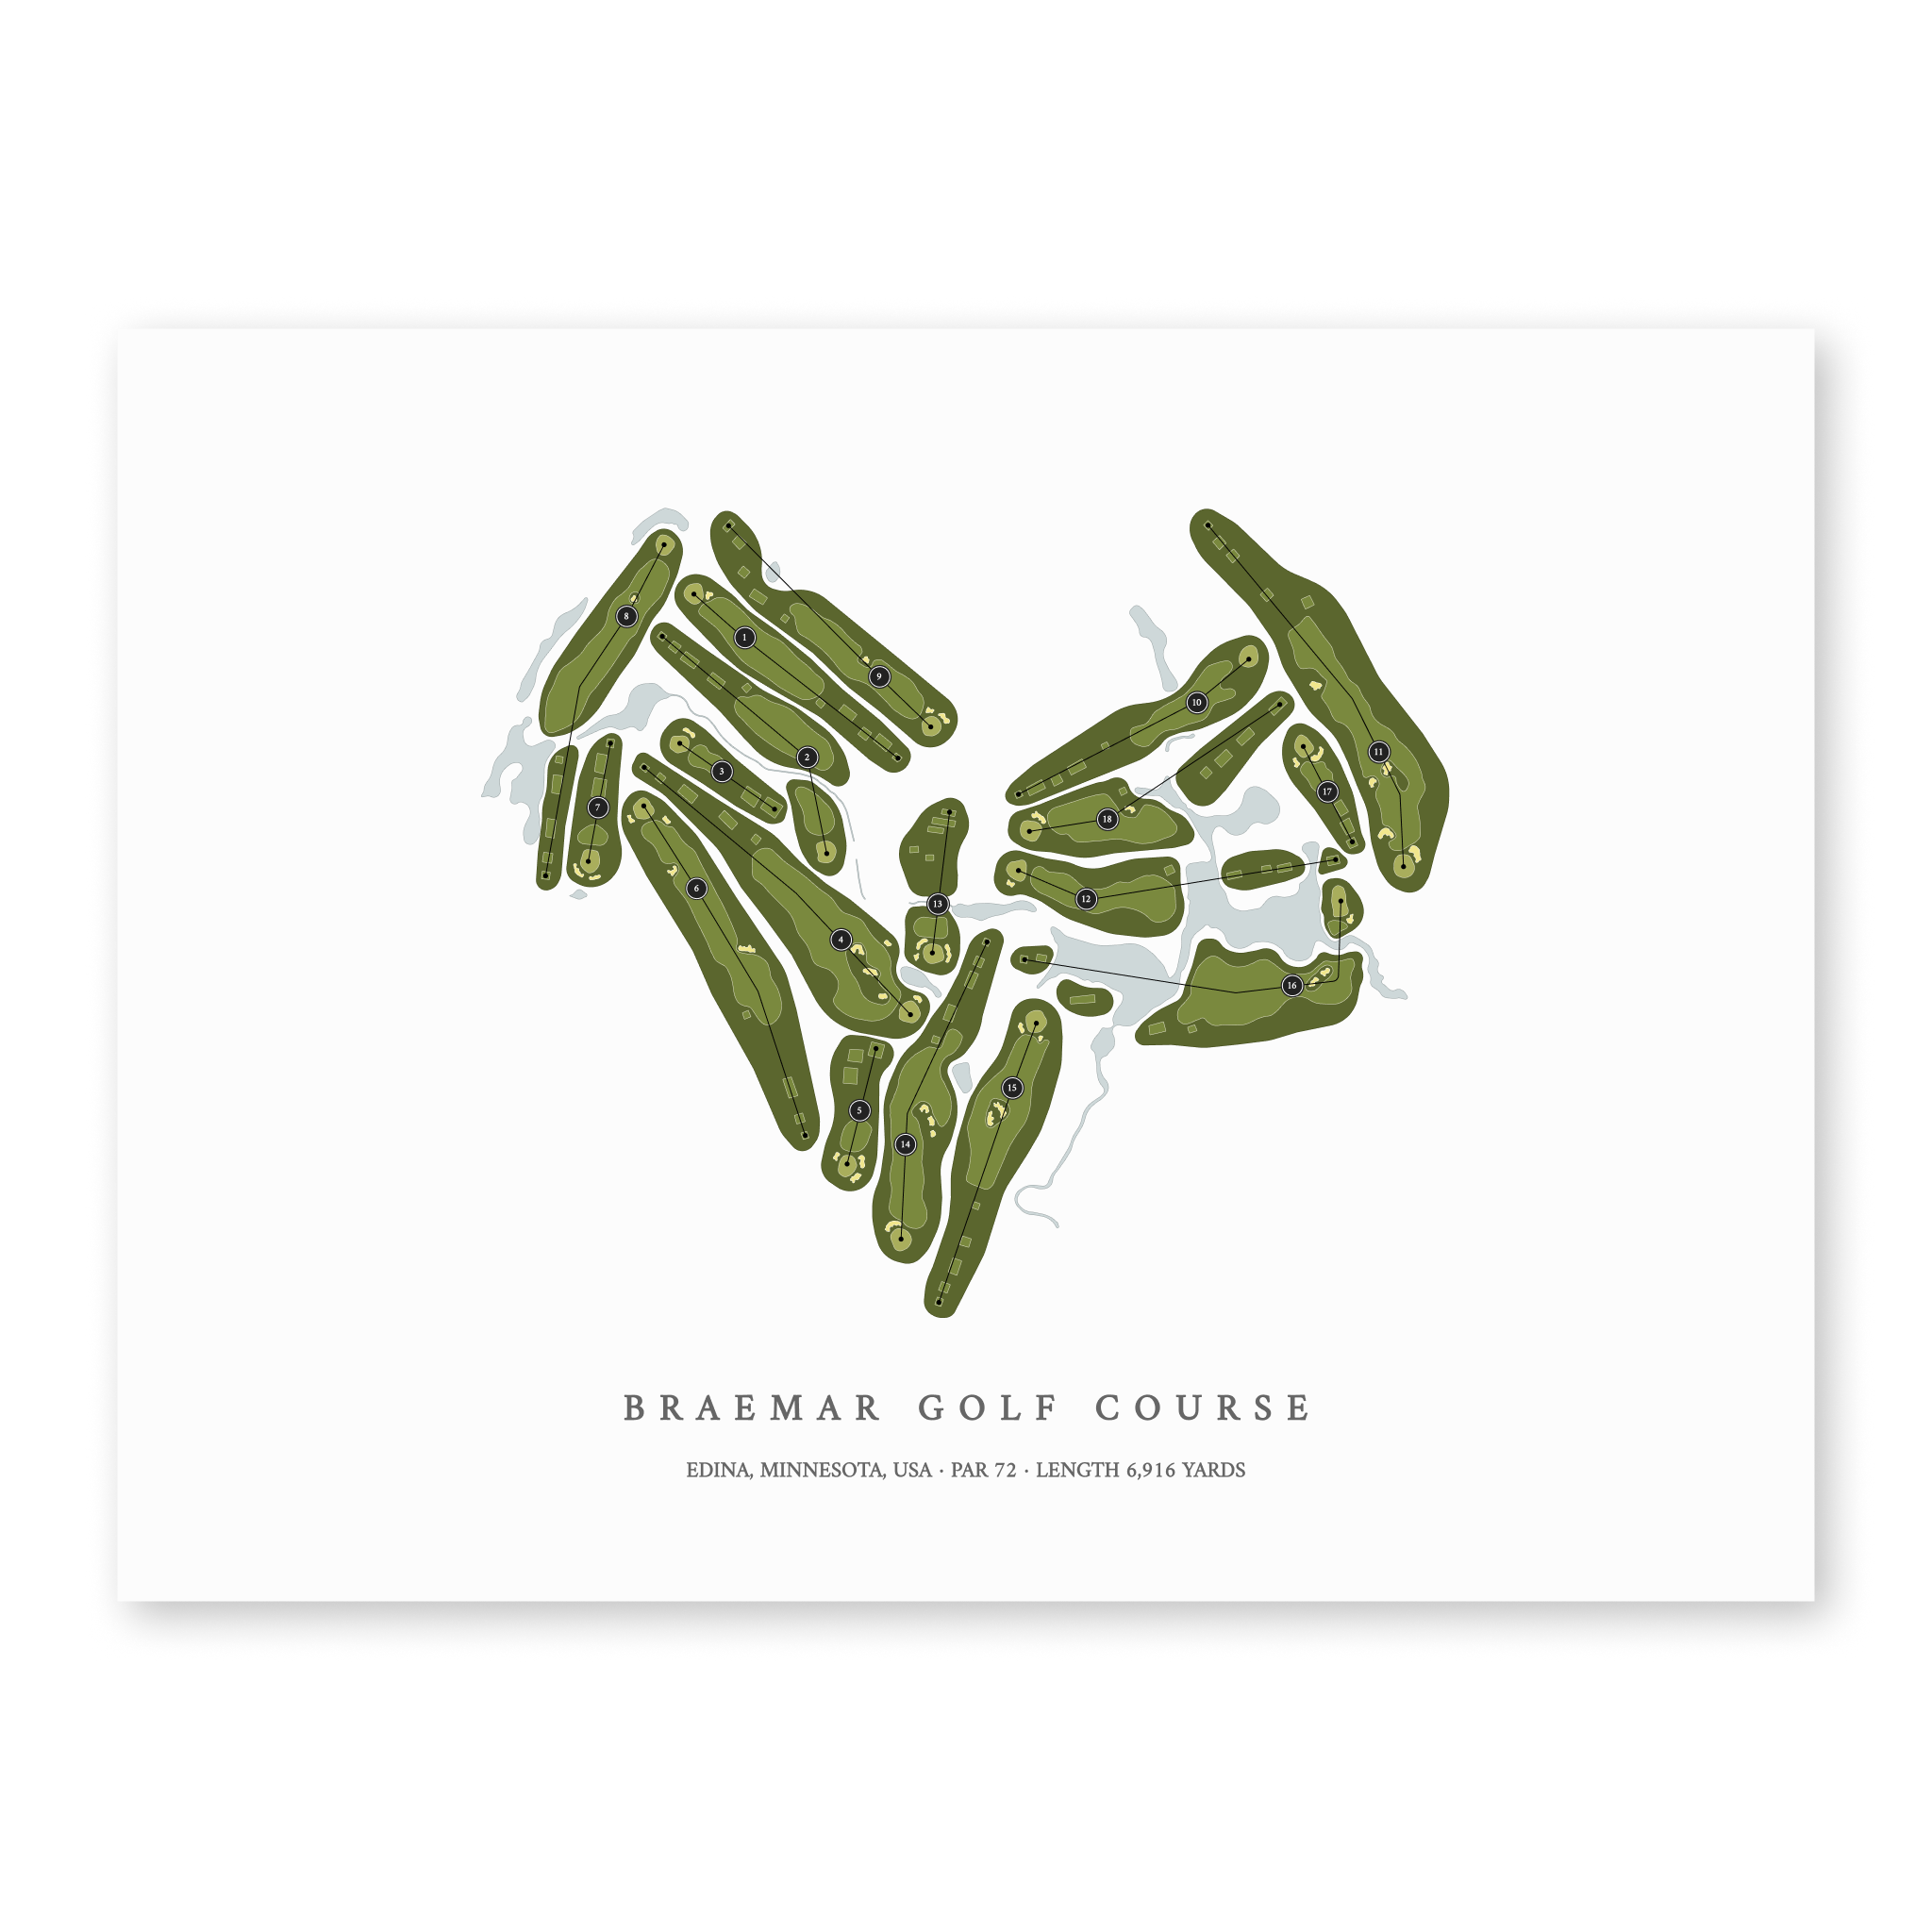 Braemar Golf Course| Golf Course Print | Unframed With Hole Numbers #hole numbers_yes